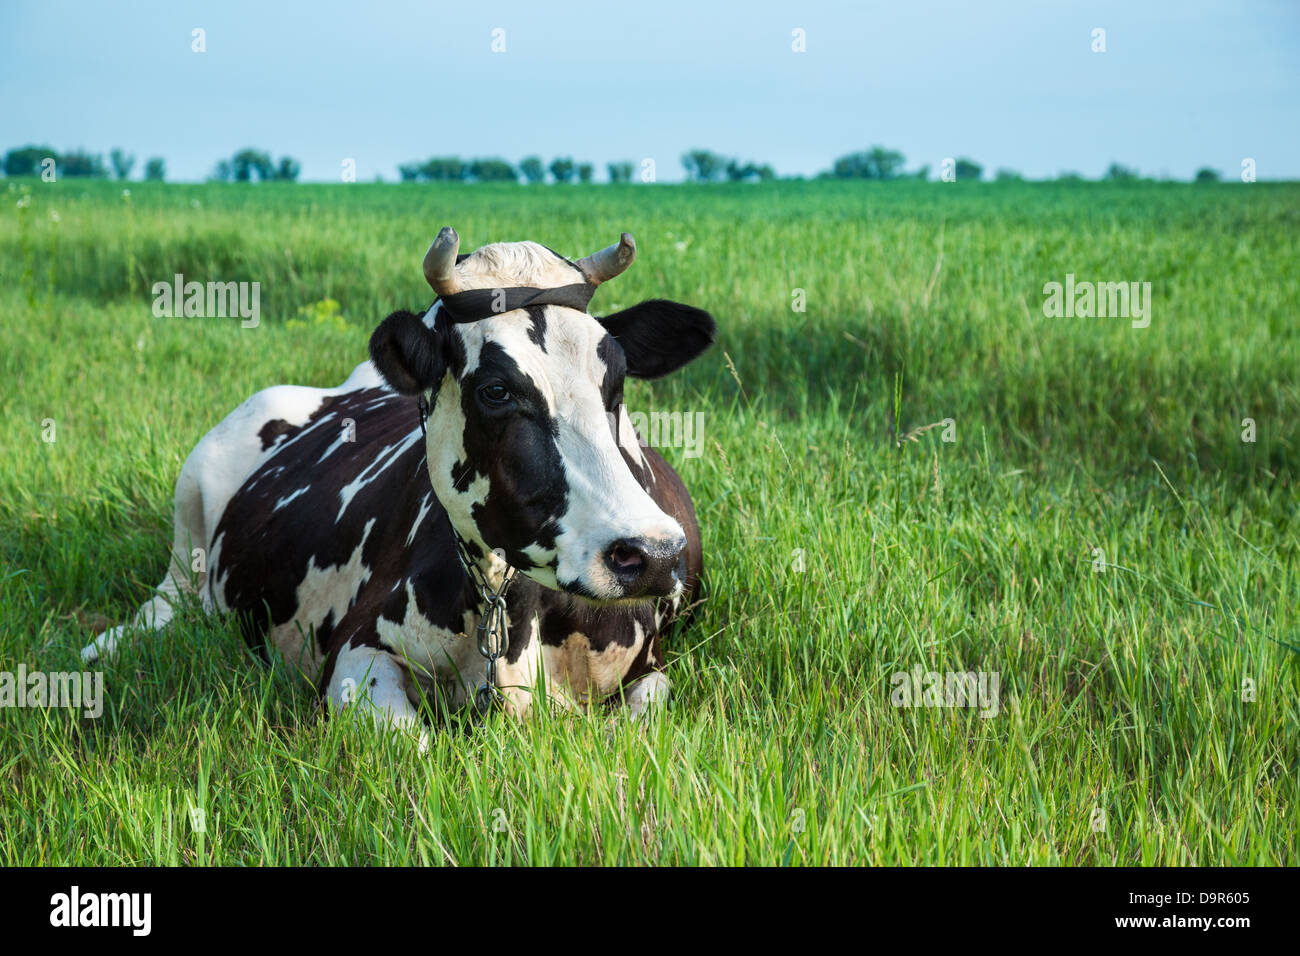 Funny black and white colour dairy cow lying in a green pasture Stock Photo